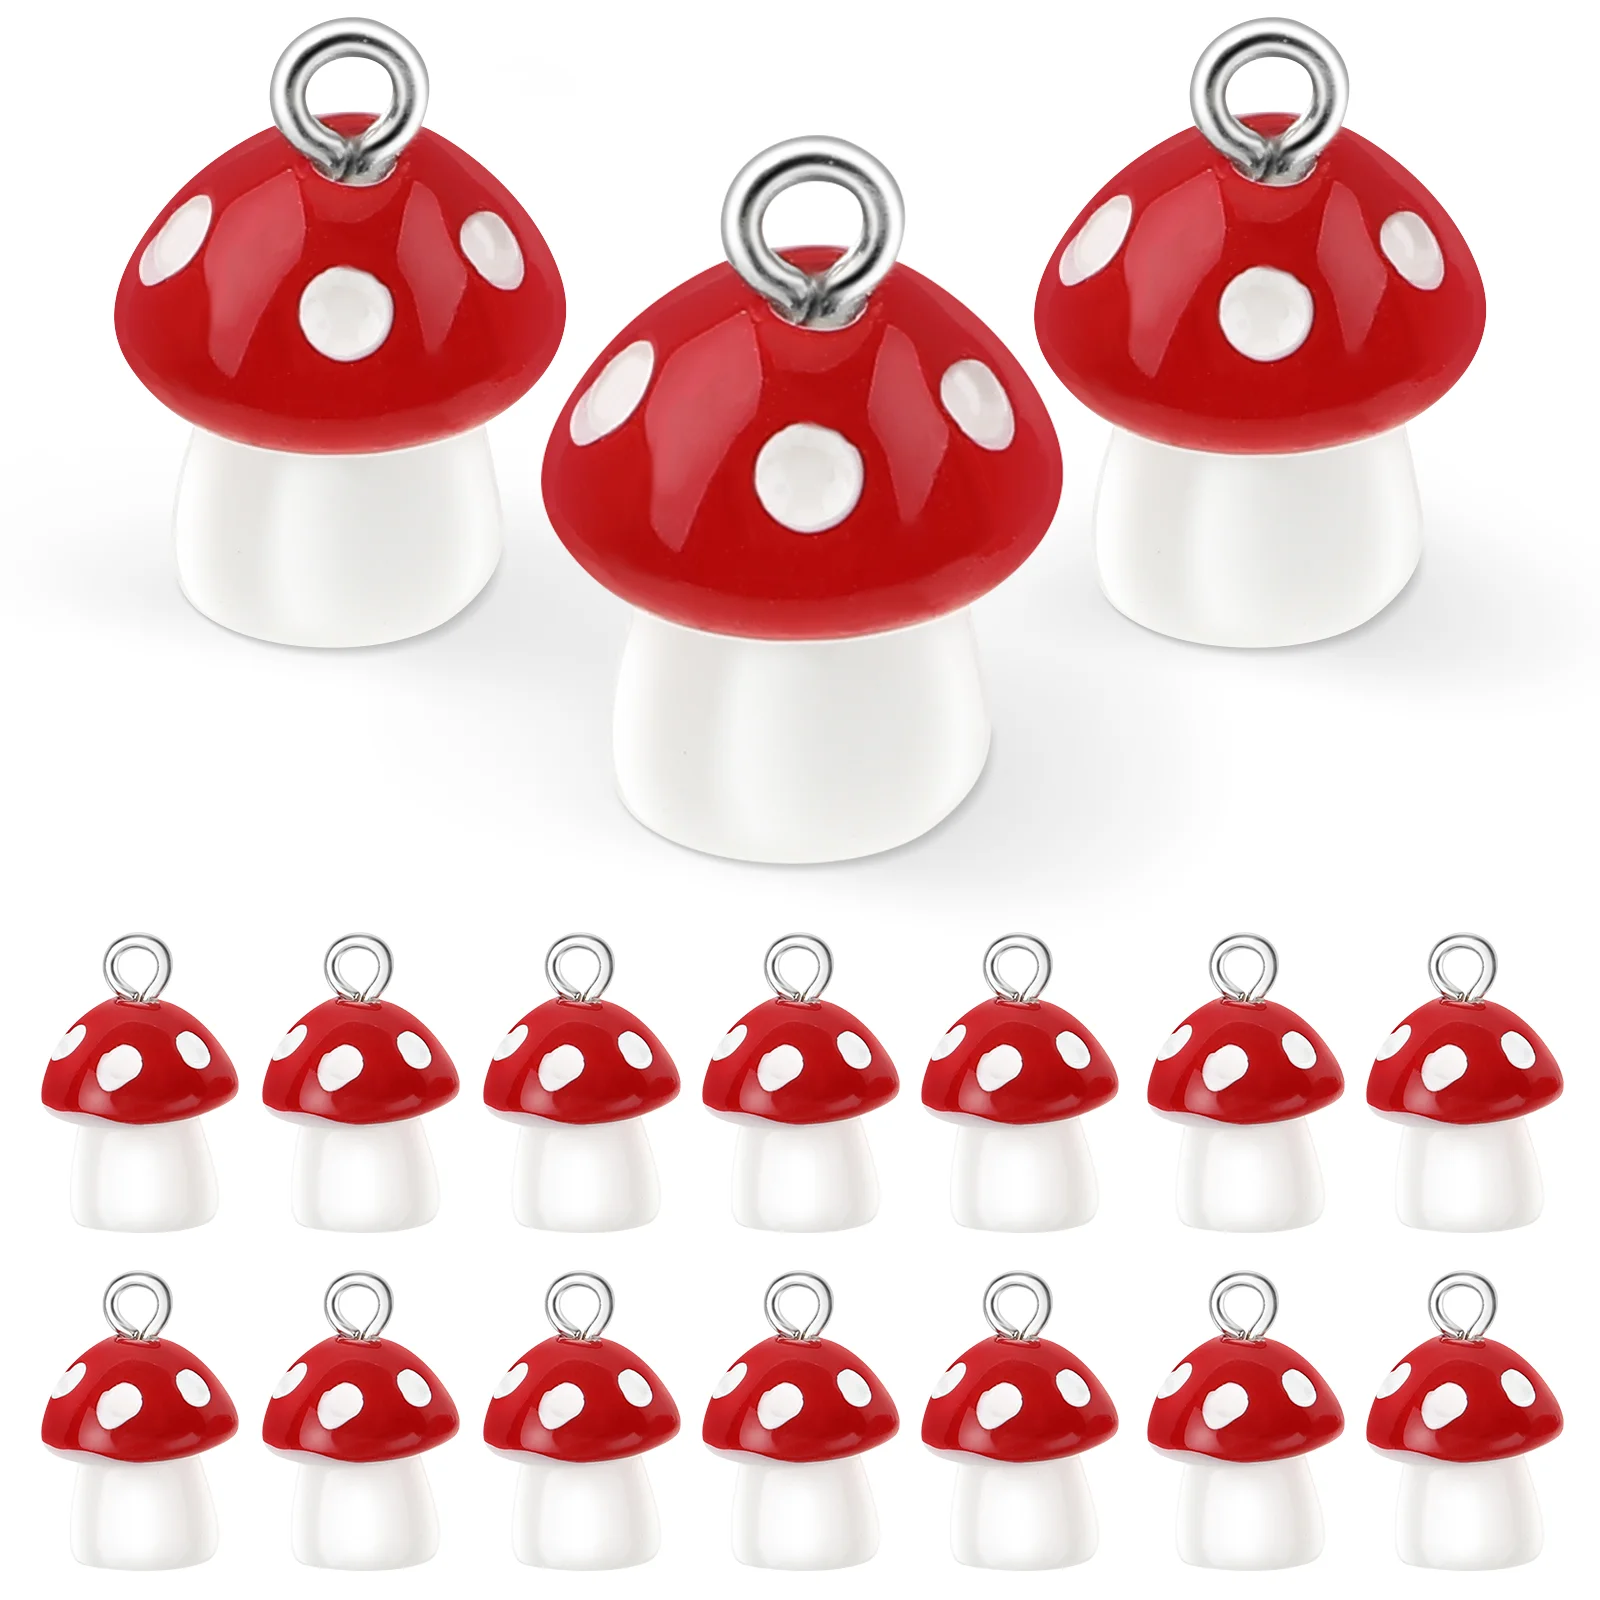 

30 Pcs Mushroom Charm Pendant Pendants for Jewelry Making Decorate Accessories Charms Necklaces